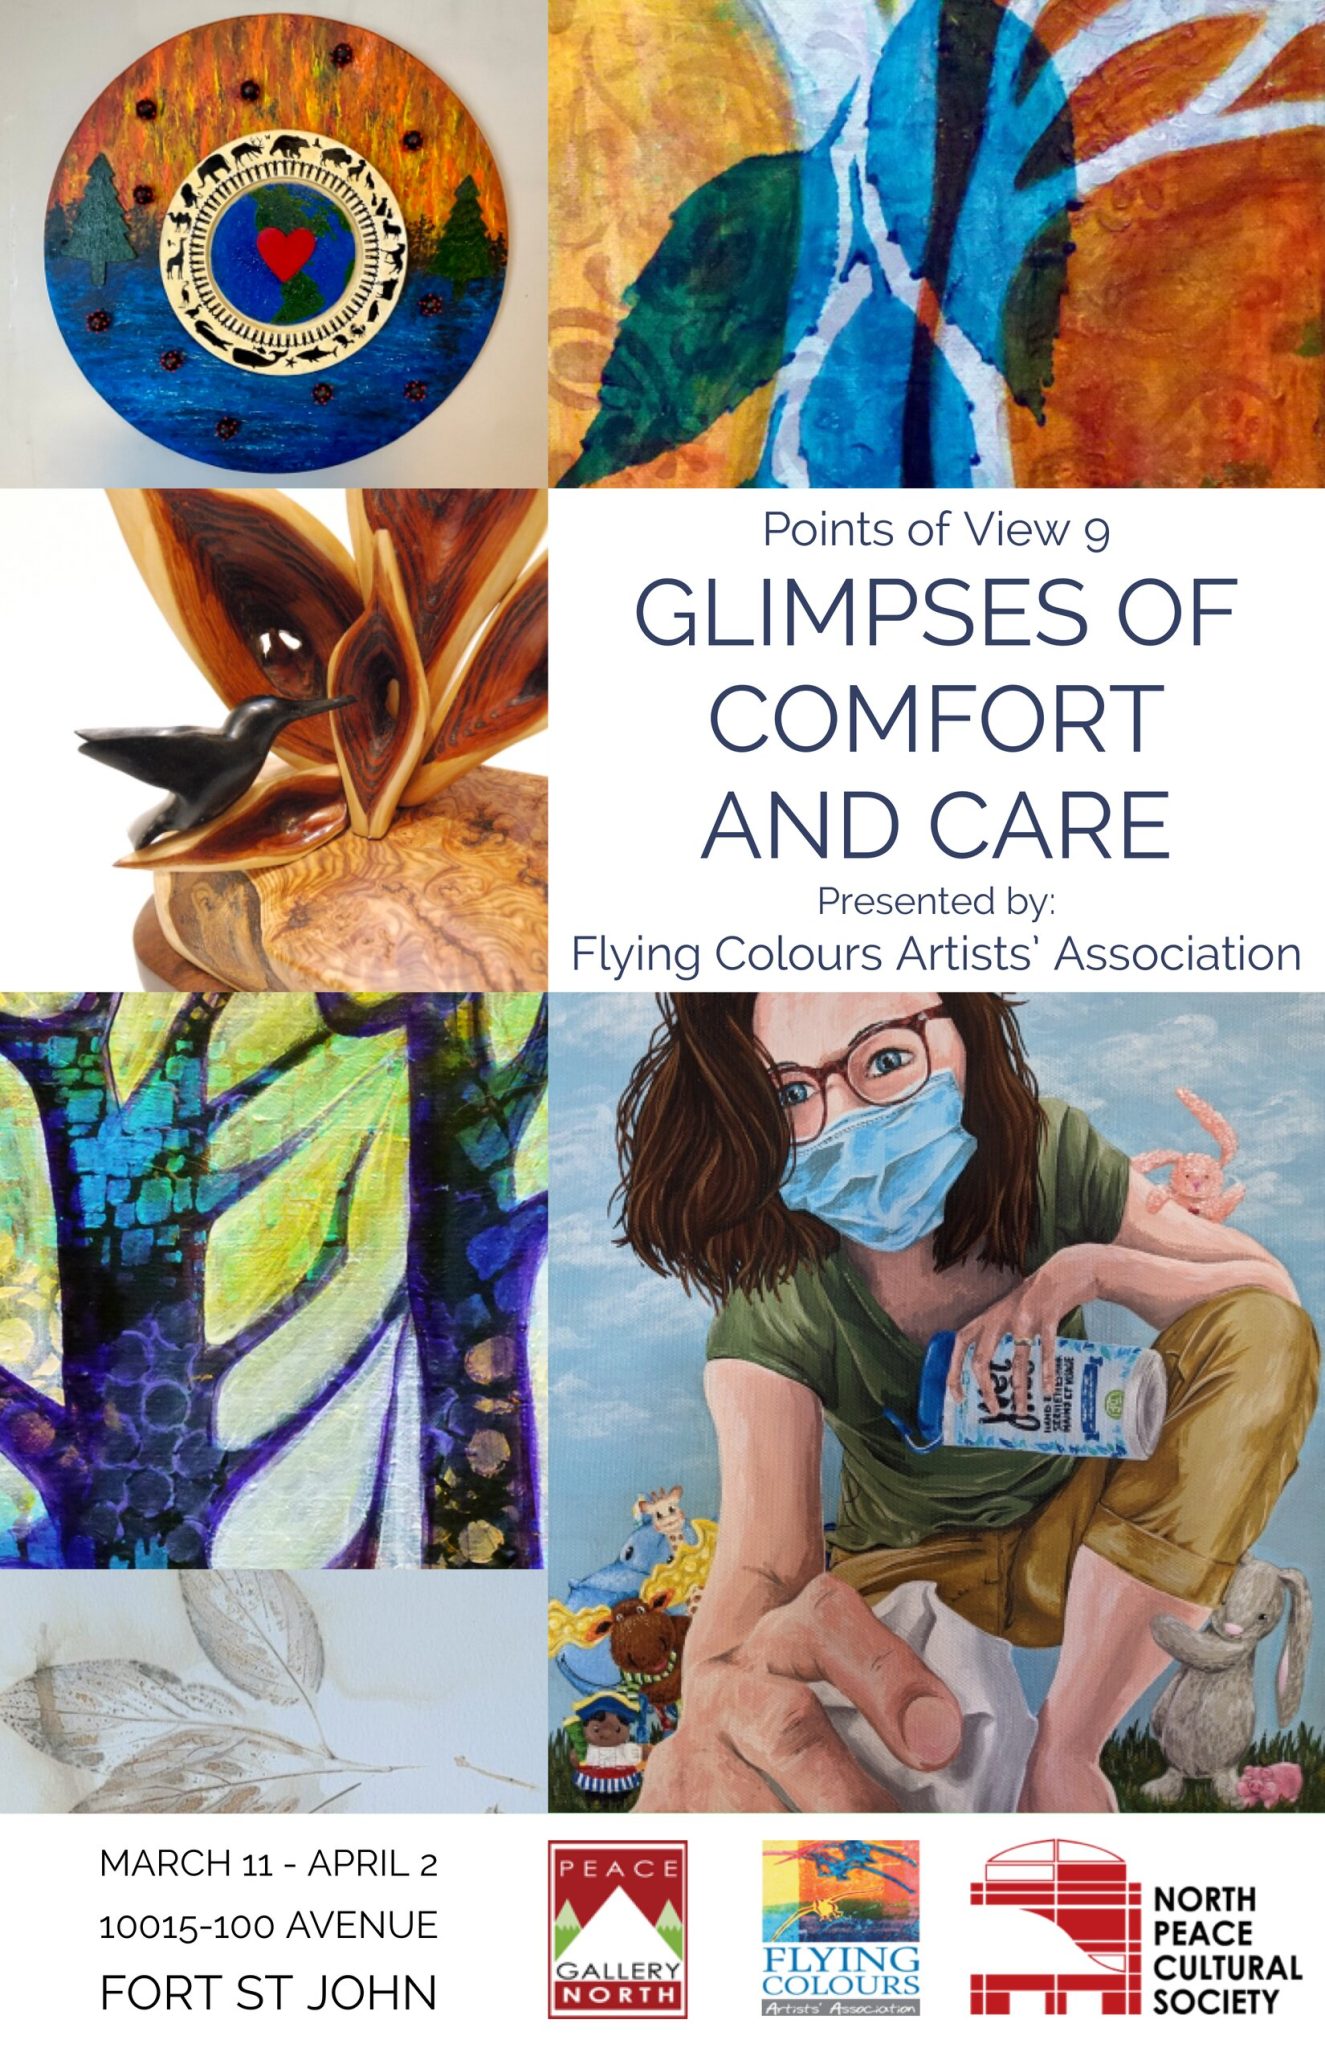 Points of View 9: Glimpses of Comfort and Care – Flying Colours Artists’ Association